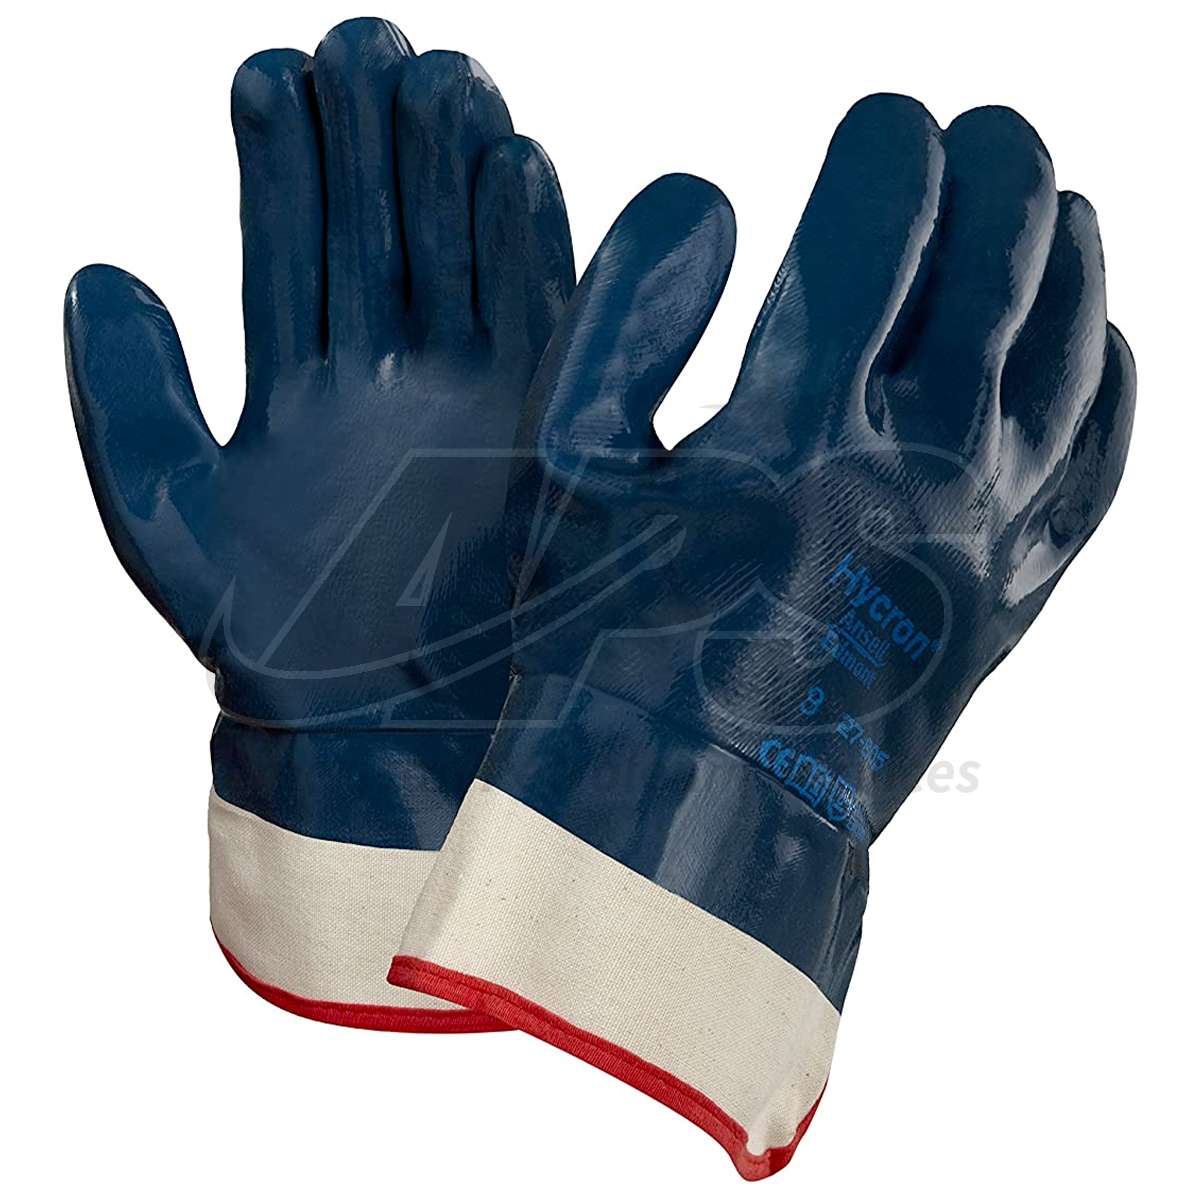 https://www.apsaviation.com/wp-content/uploads/27-805-nitrile-dipped-coated-safety-gloves.jpg